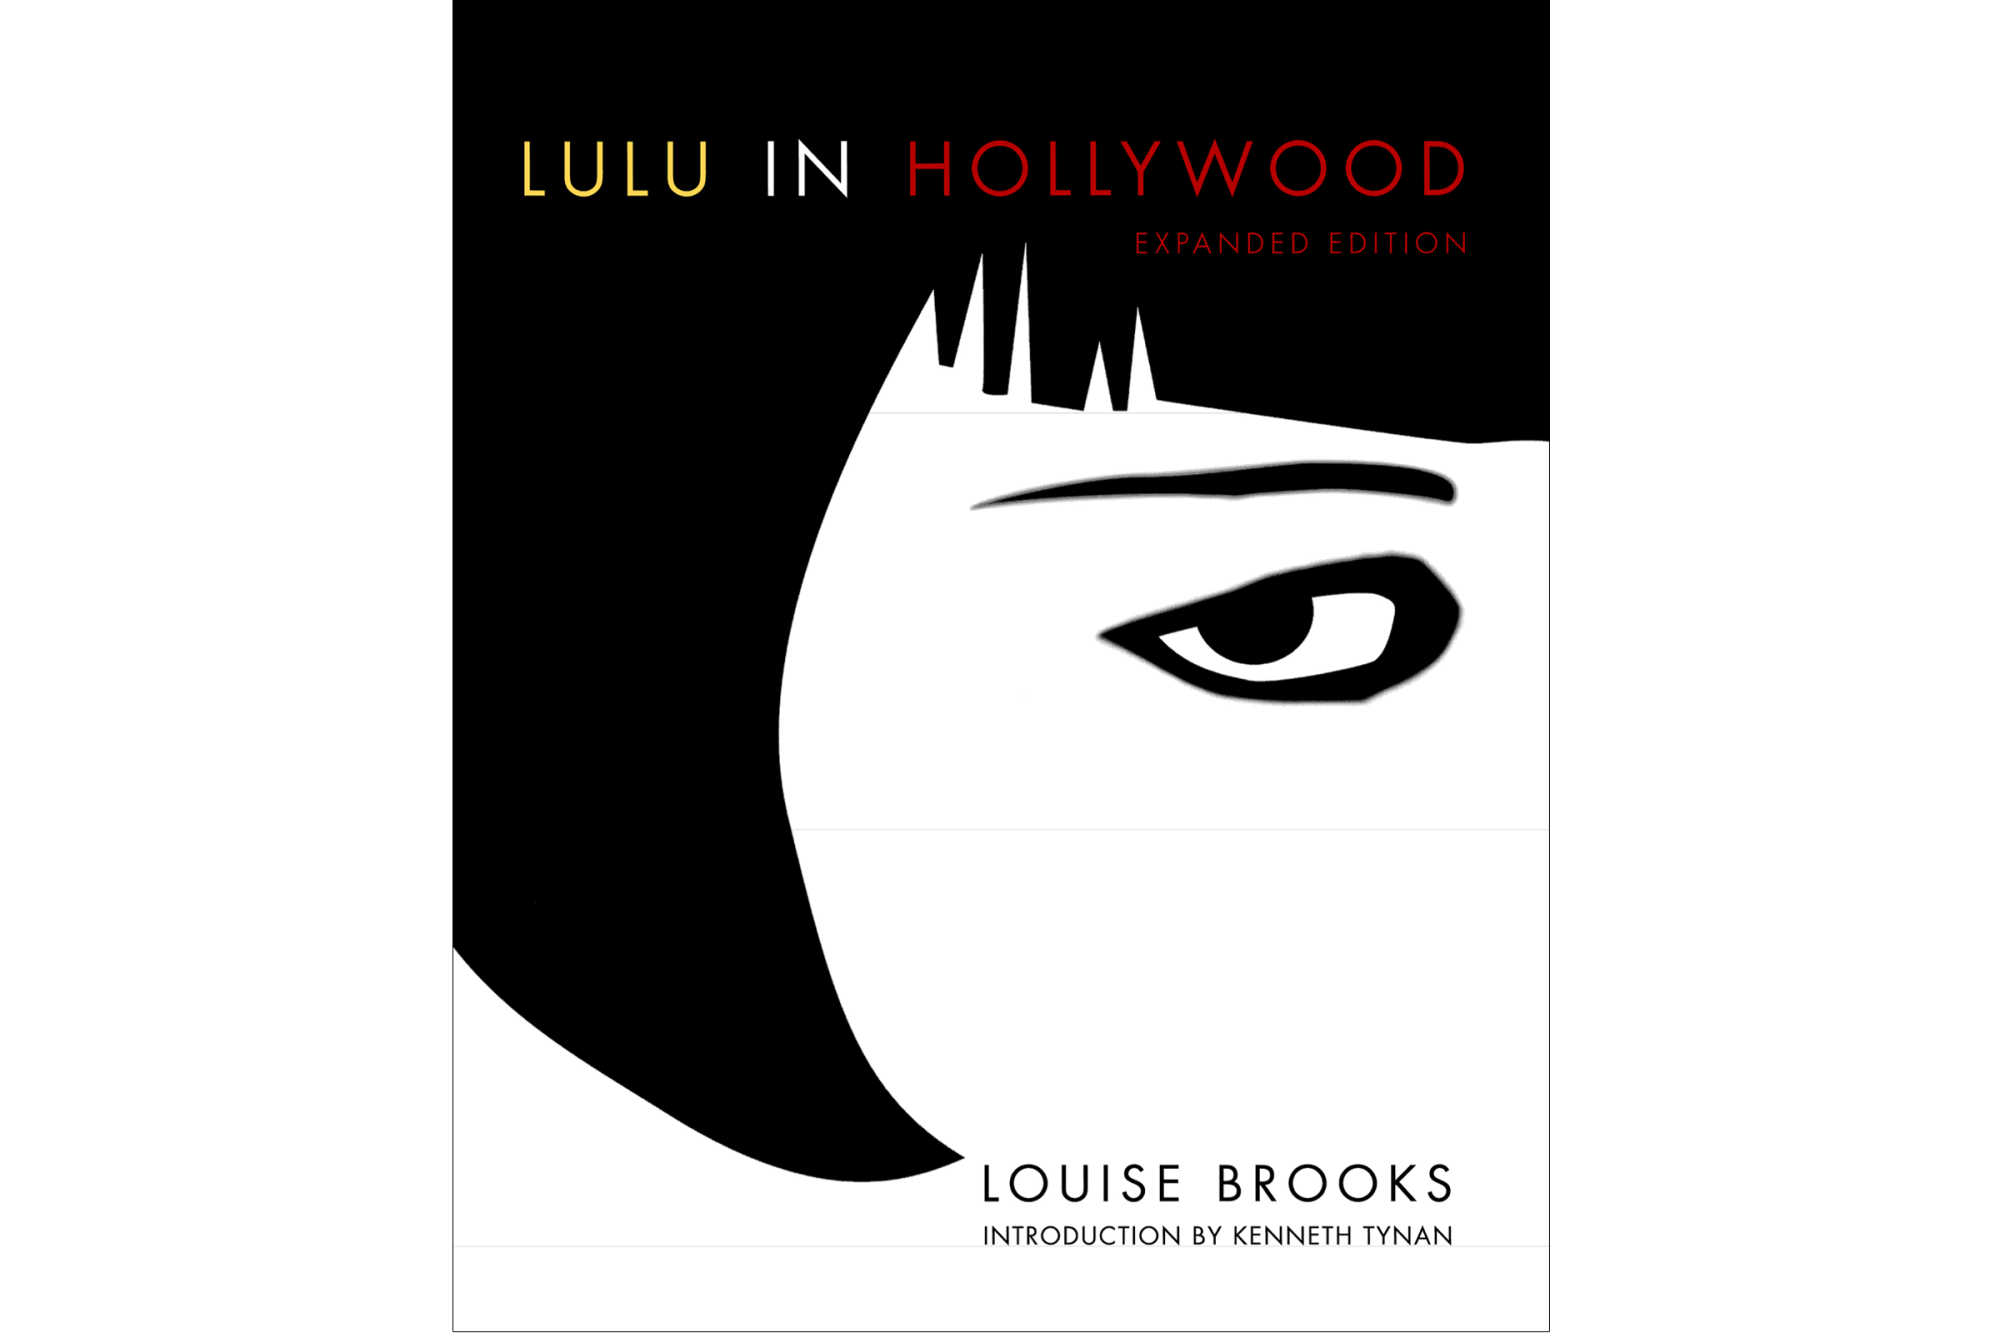 "Lulu In Hollywood: Expanded Edition" by Louise Brooks